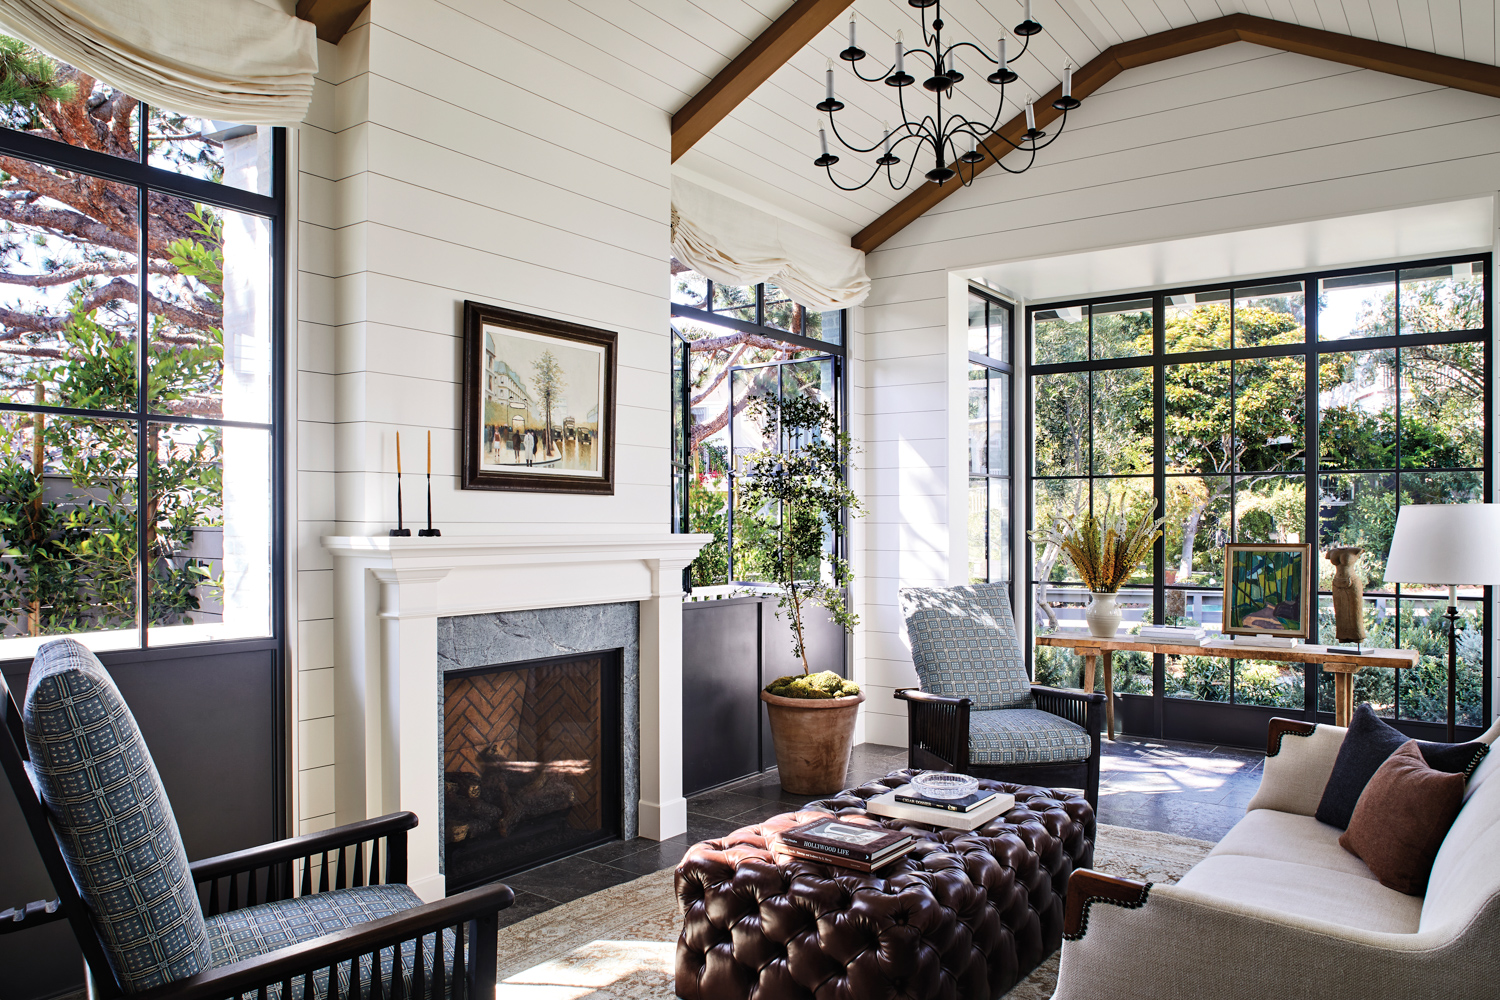 Living room with white paneled walls, steel-framed windows, a fireplace and a leather-tufted ottoman